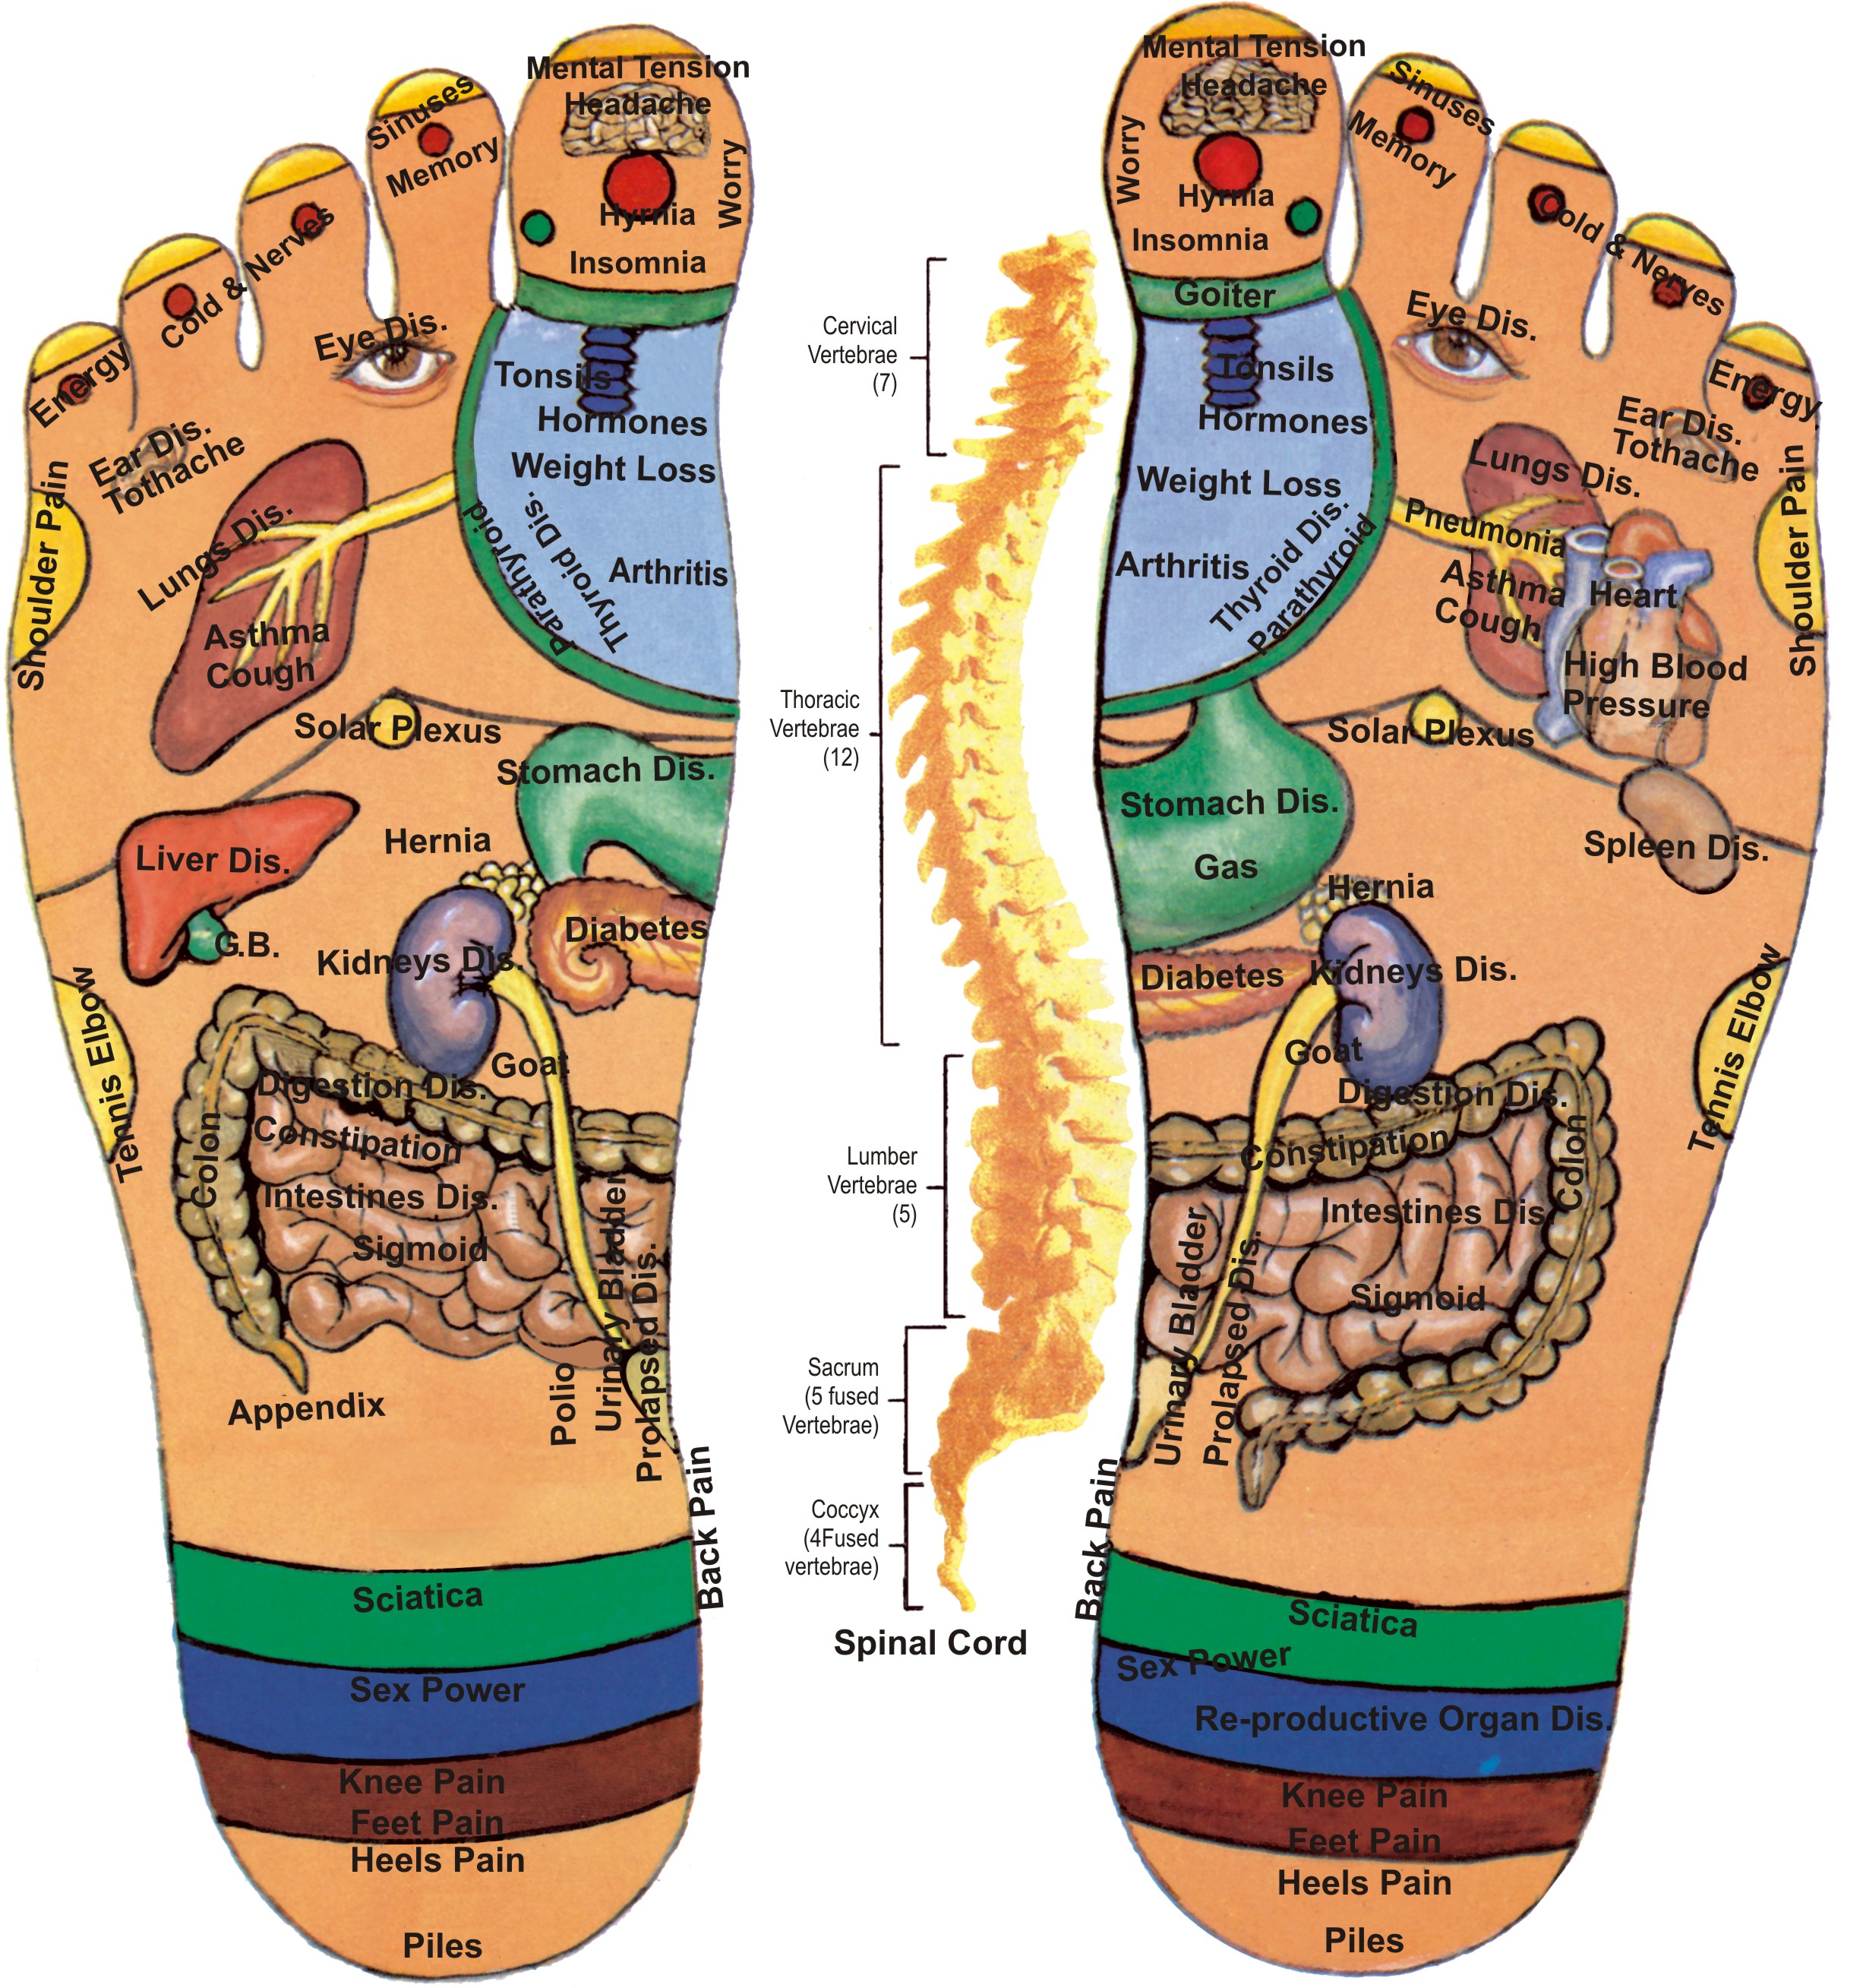 acupressure-points-in-foot-acupressure-points-in-body